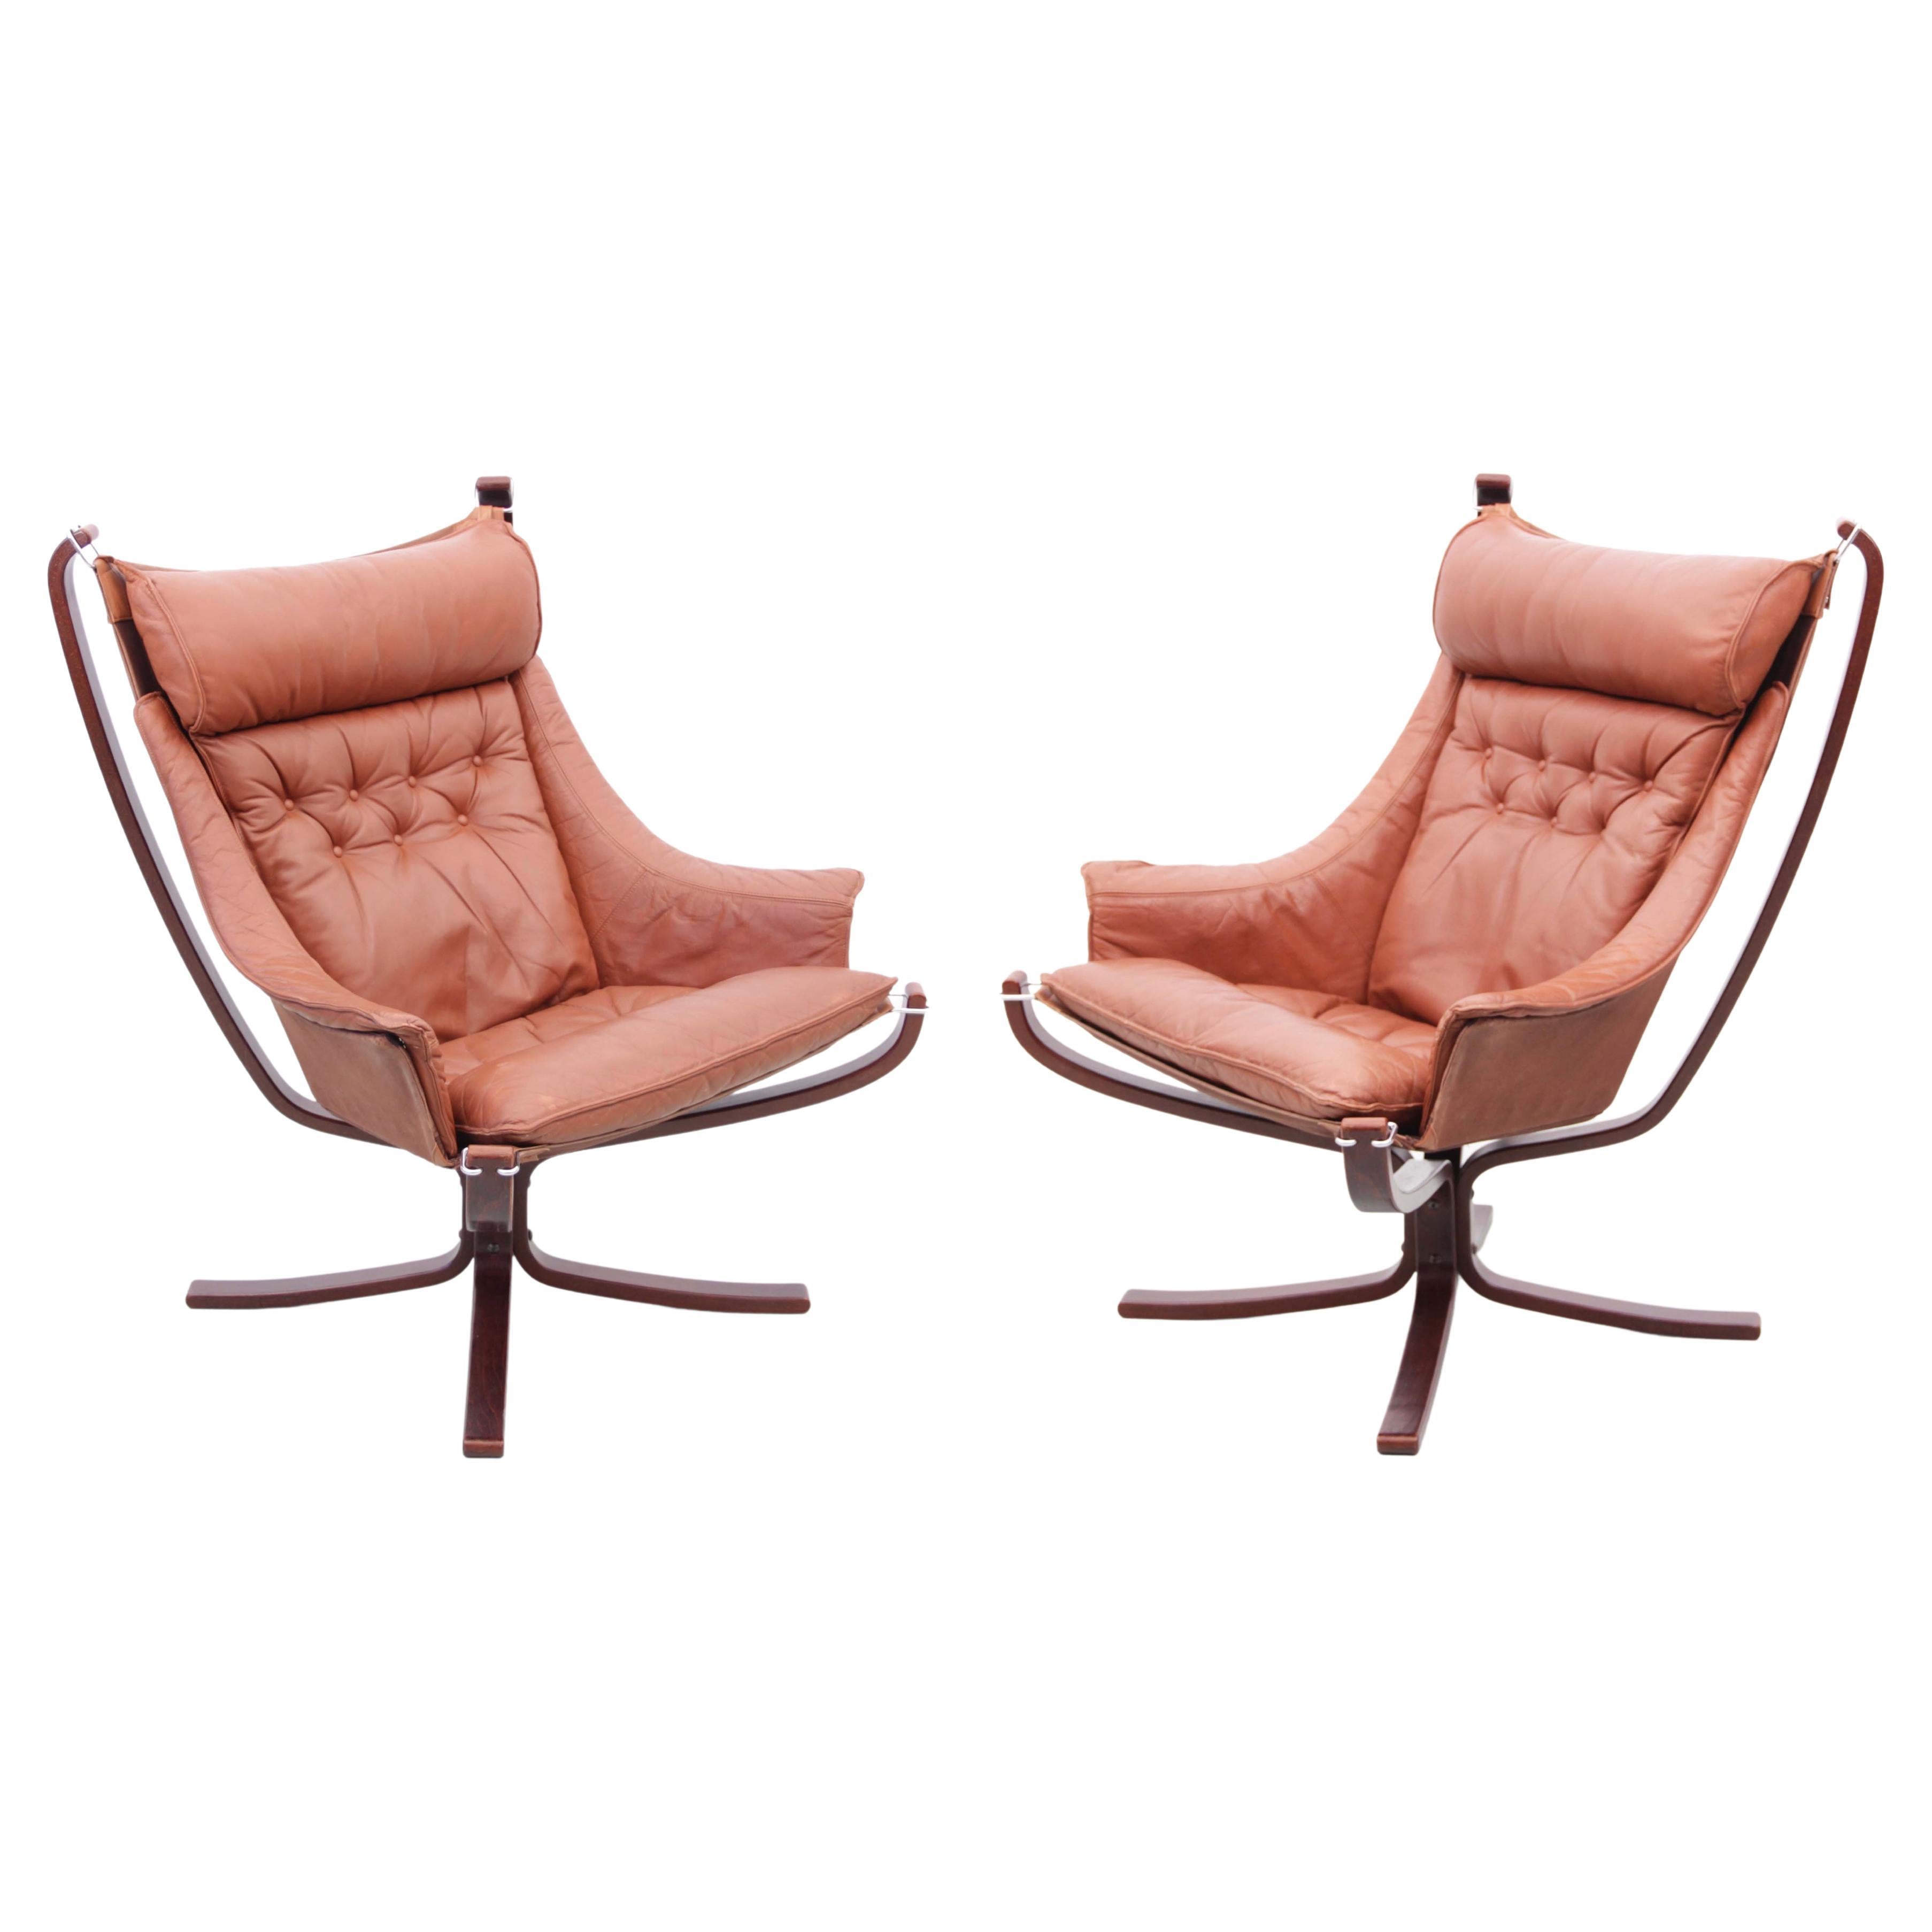 Mid-Century Modern Scandinavian Pair of "Falcon" Lounge Chair by Sigurd Ressel